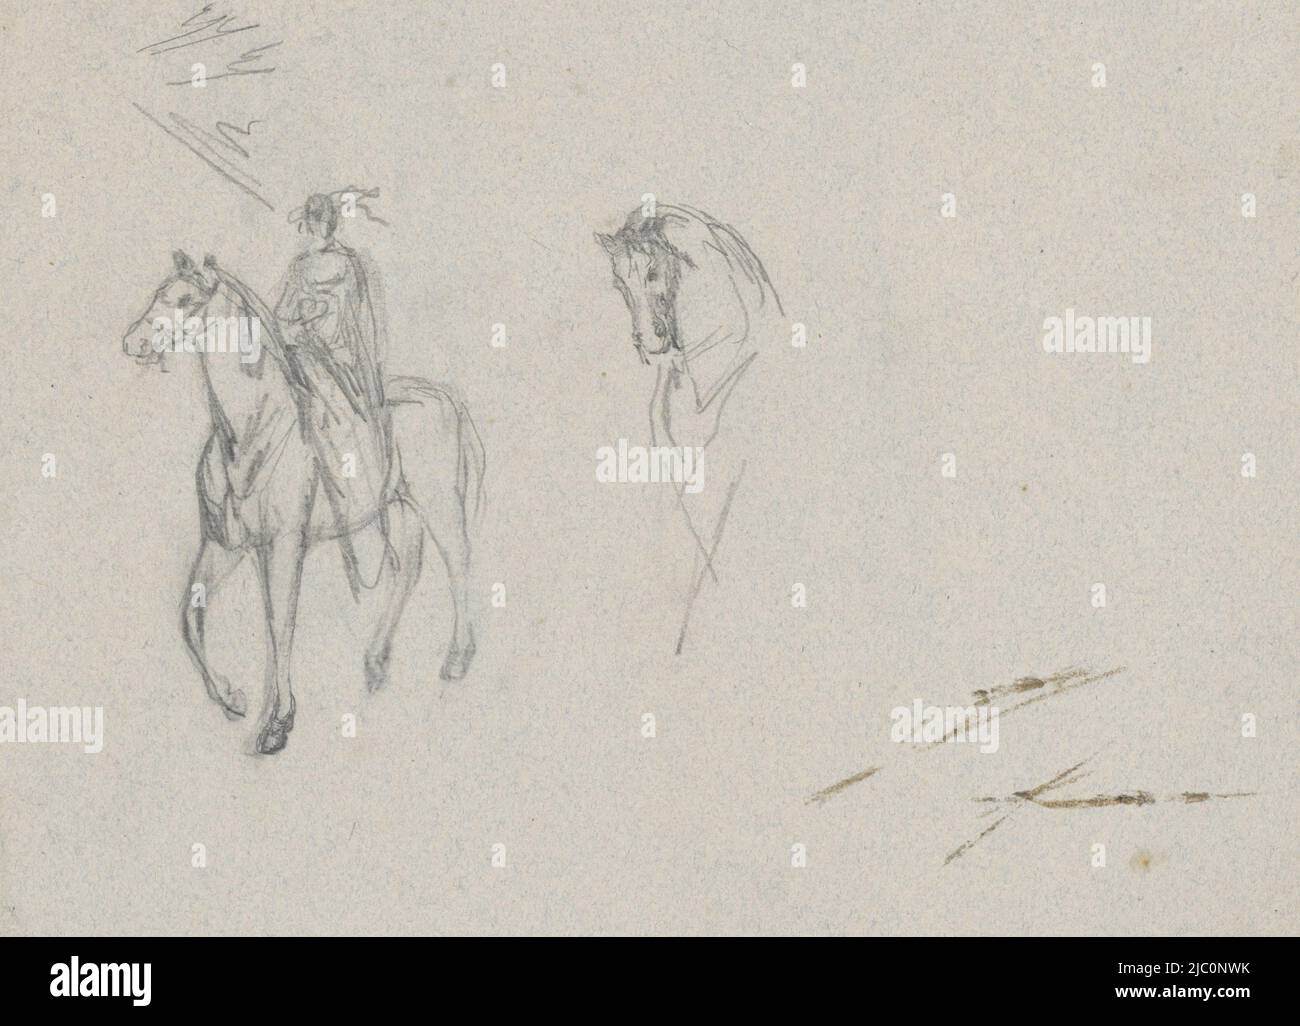 Two studies of a horse, draughtsman: Jan Kuyper, 1855 - 1912, paper, h 235 mm × w 305 mm Stock Photo